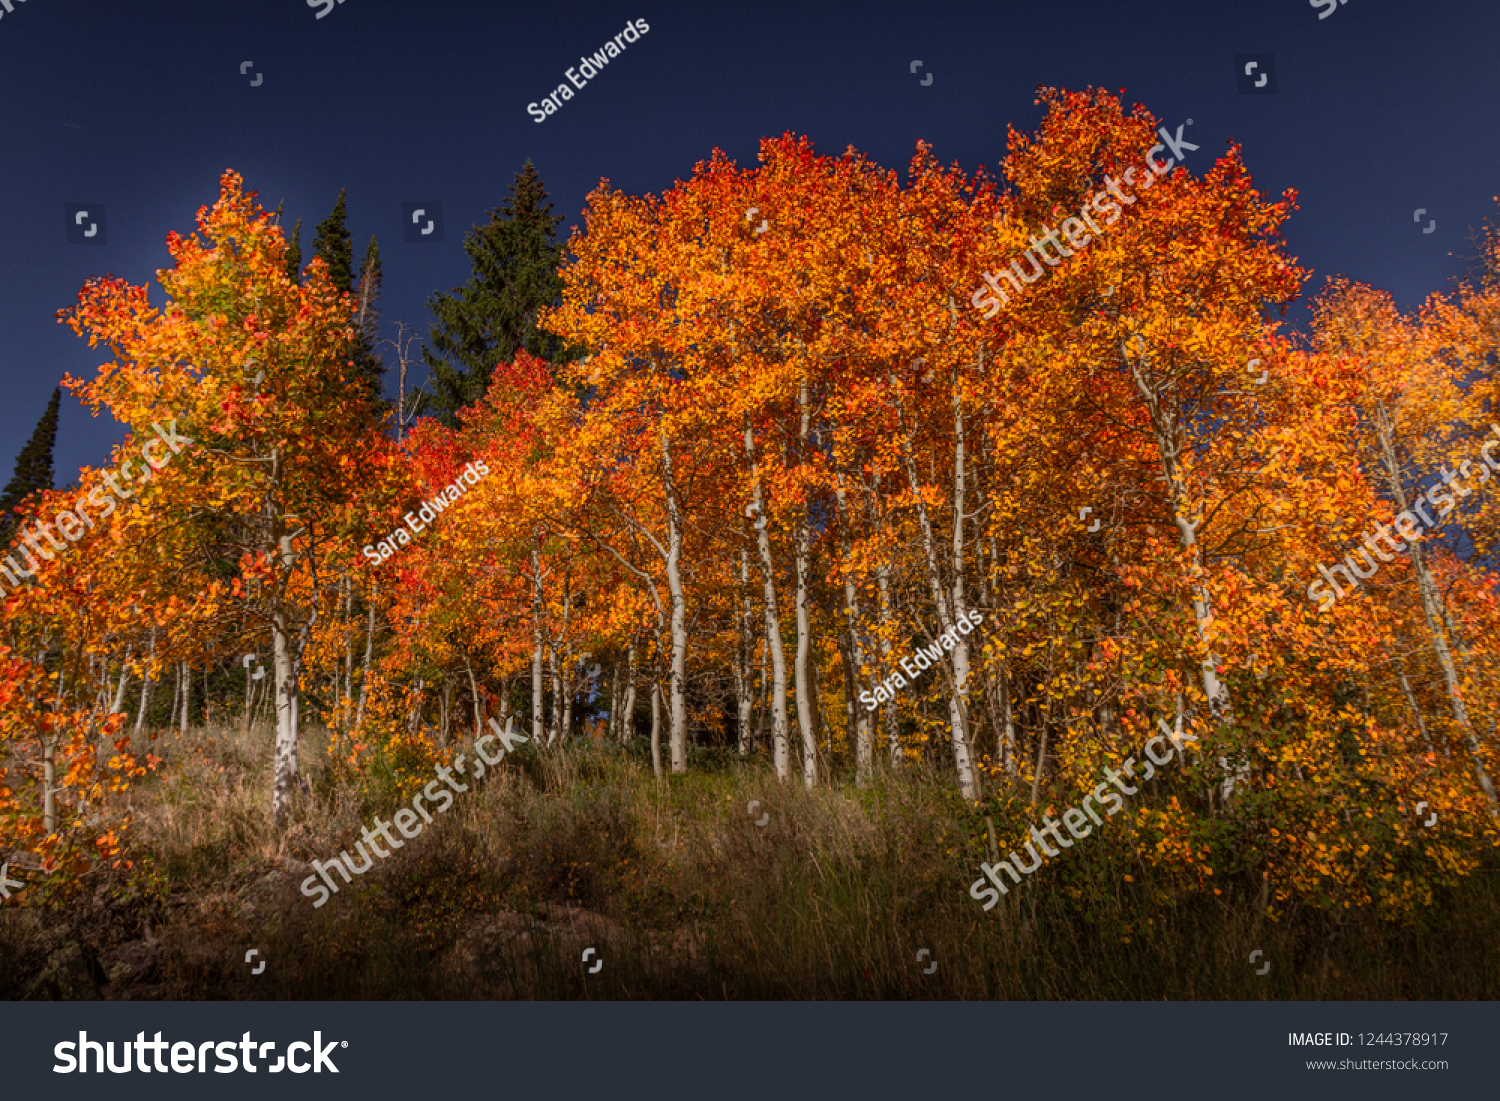 Spectacular saturated view of autumn leaf color at dusk in Southern Utah. #1244378917